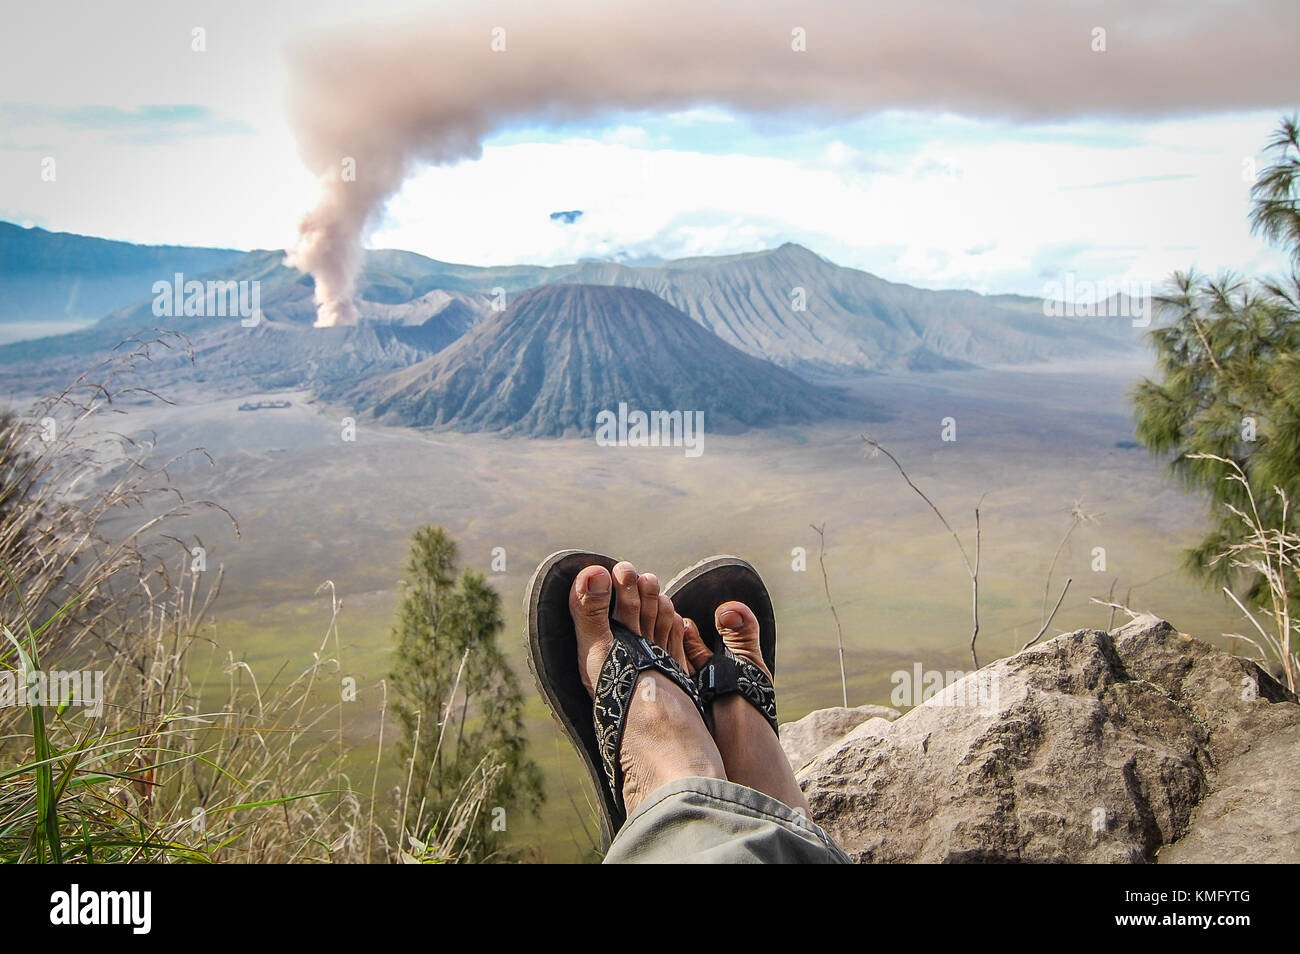 Eruption of mount Bromo and my sendals. Stock Photo